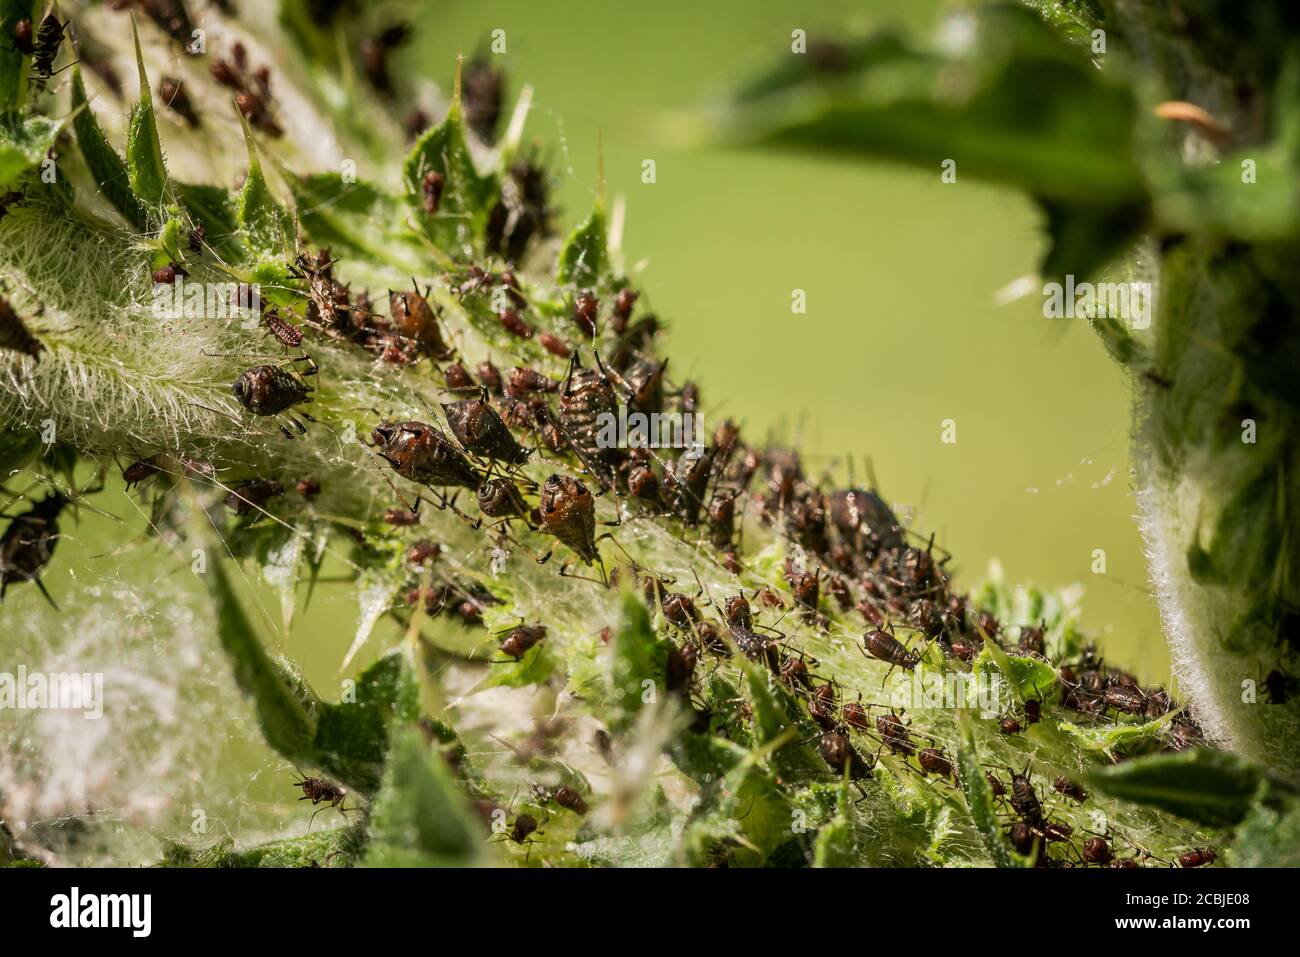 Extreme closeup of large aphid colony infesting plant leaves Stock Photo